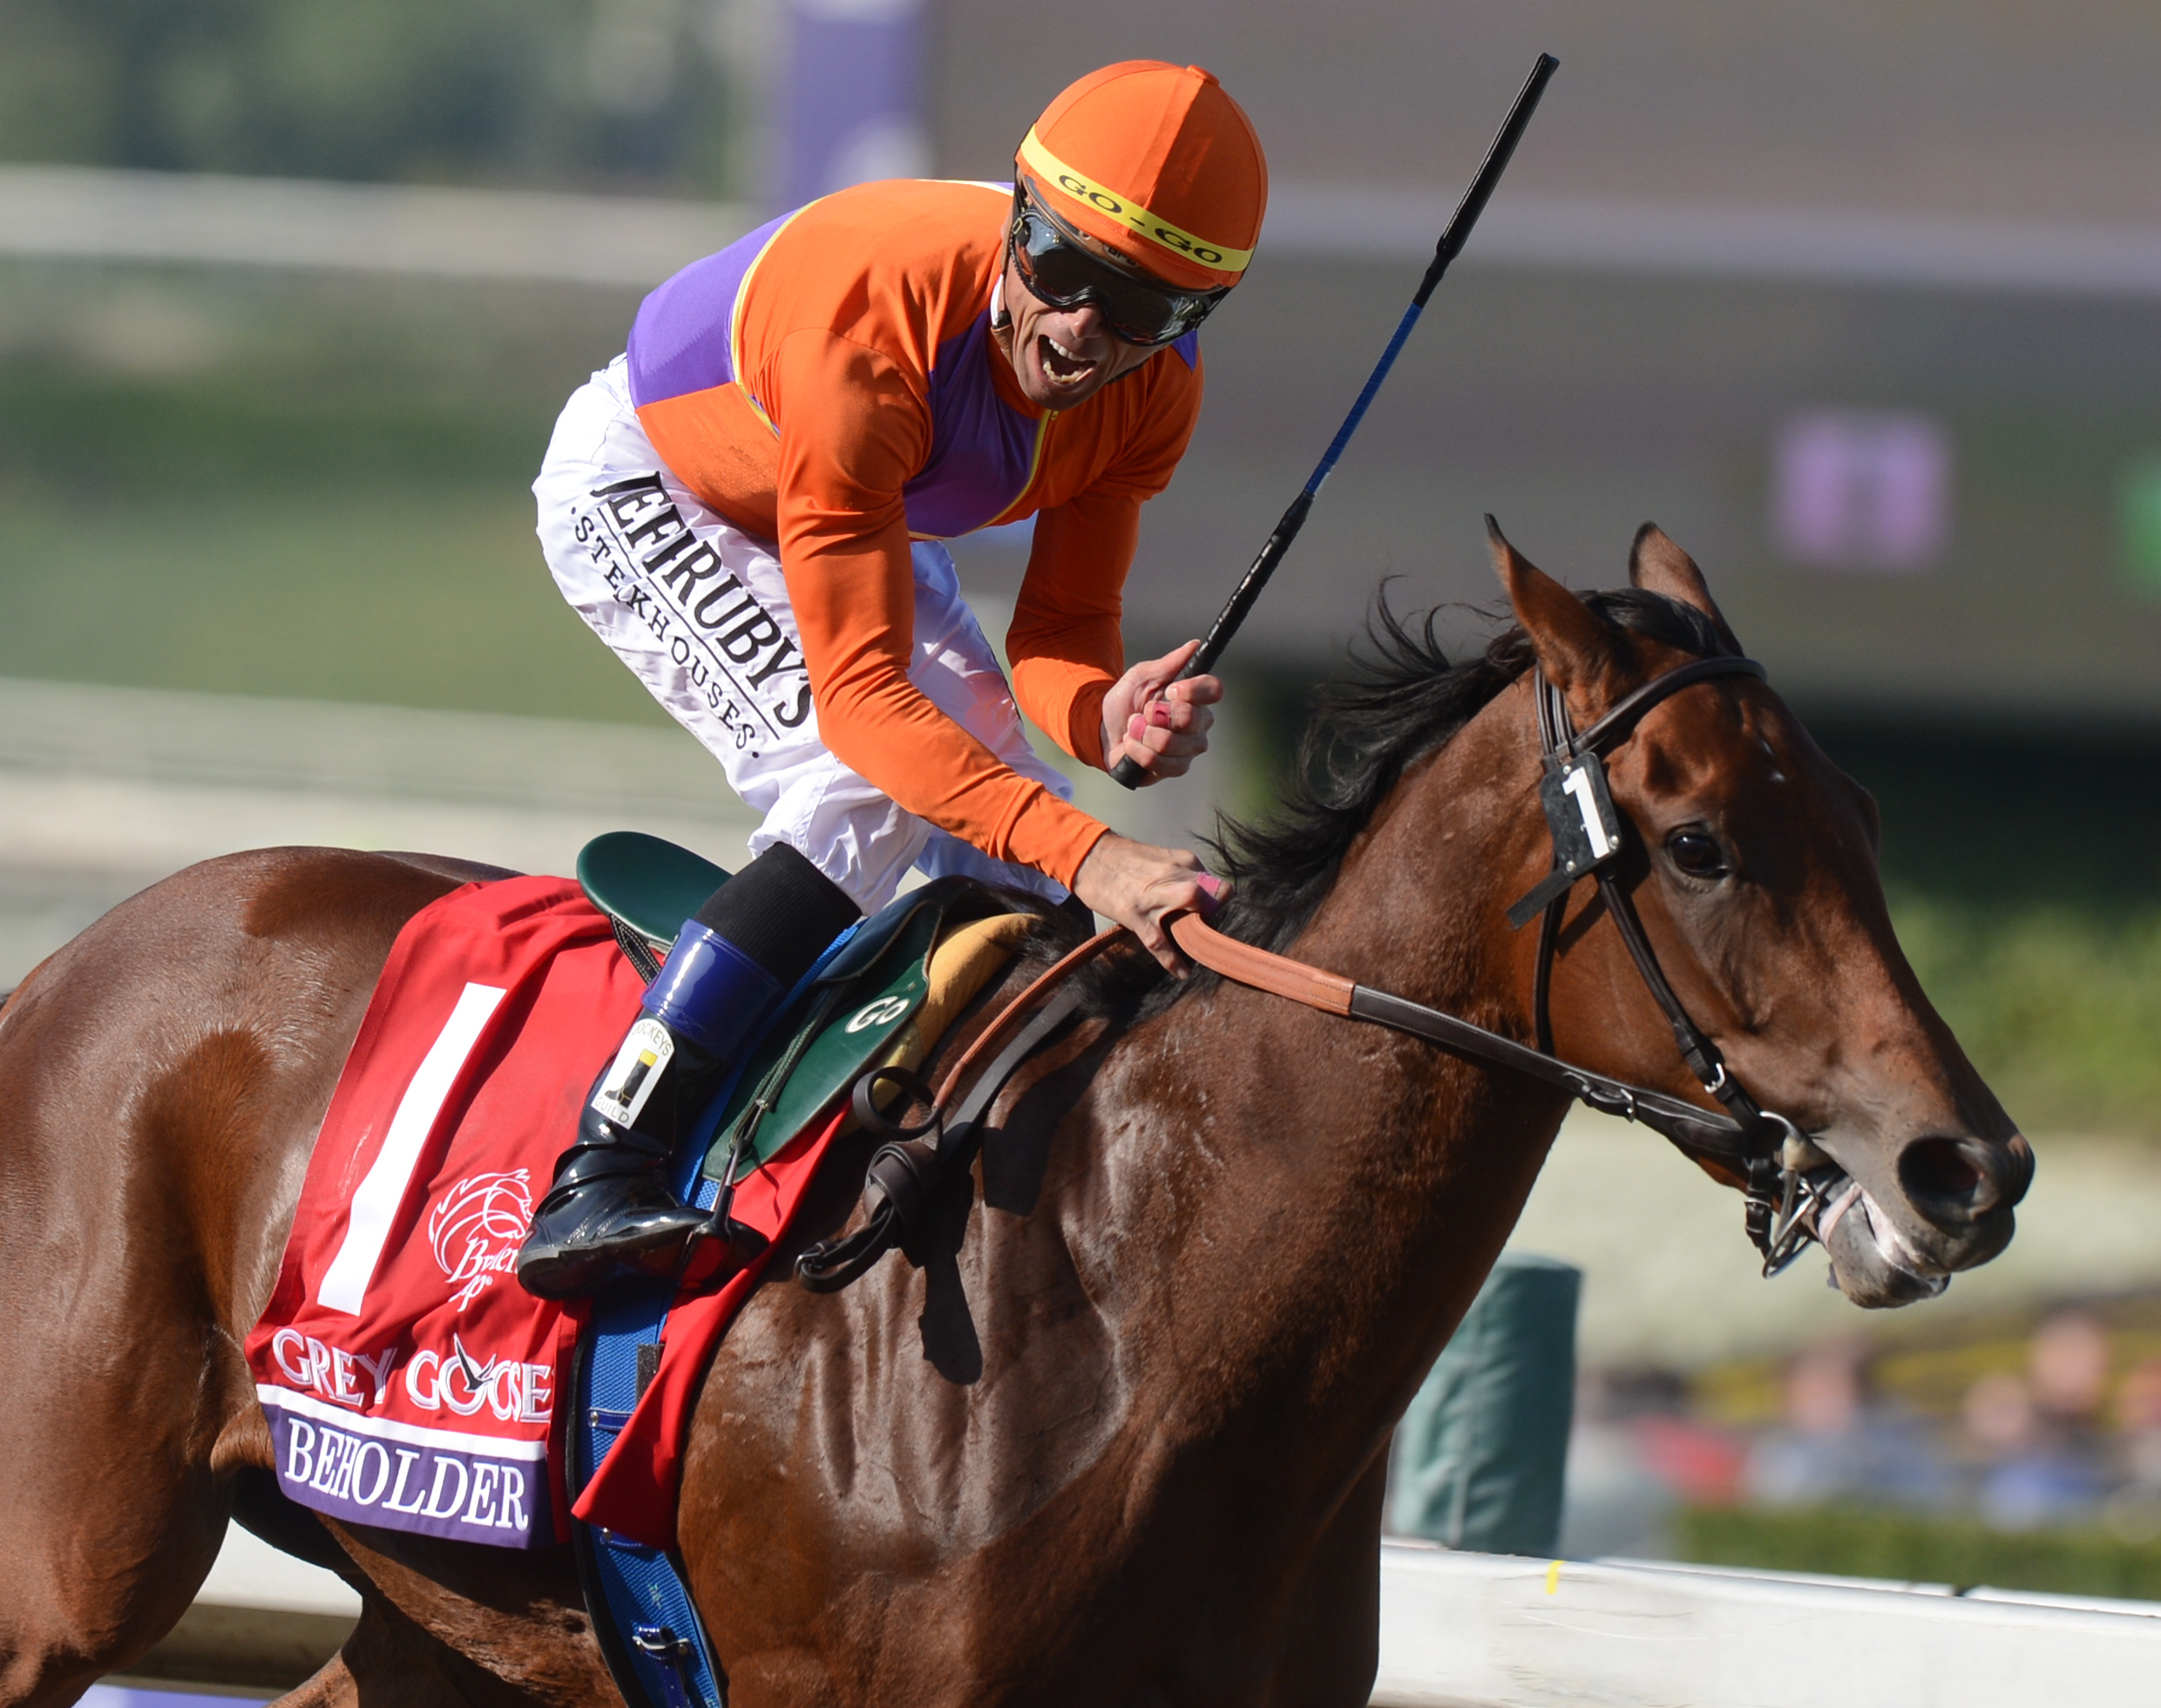 Garrett Gomez winning the 2012 Breeders' Cup Juvenile Fillies with Beholder (Breeders' Cup Photo)